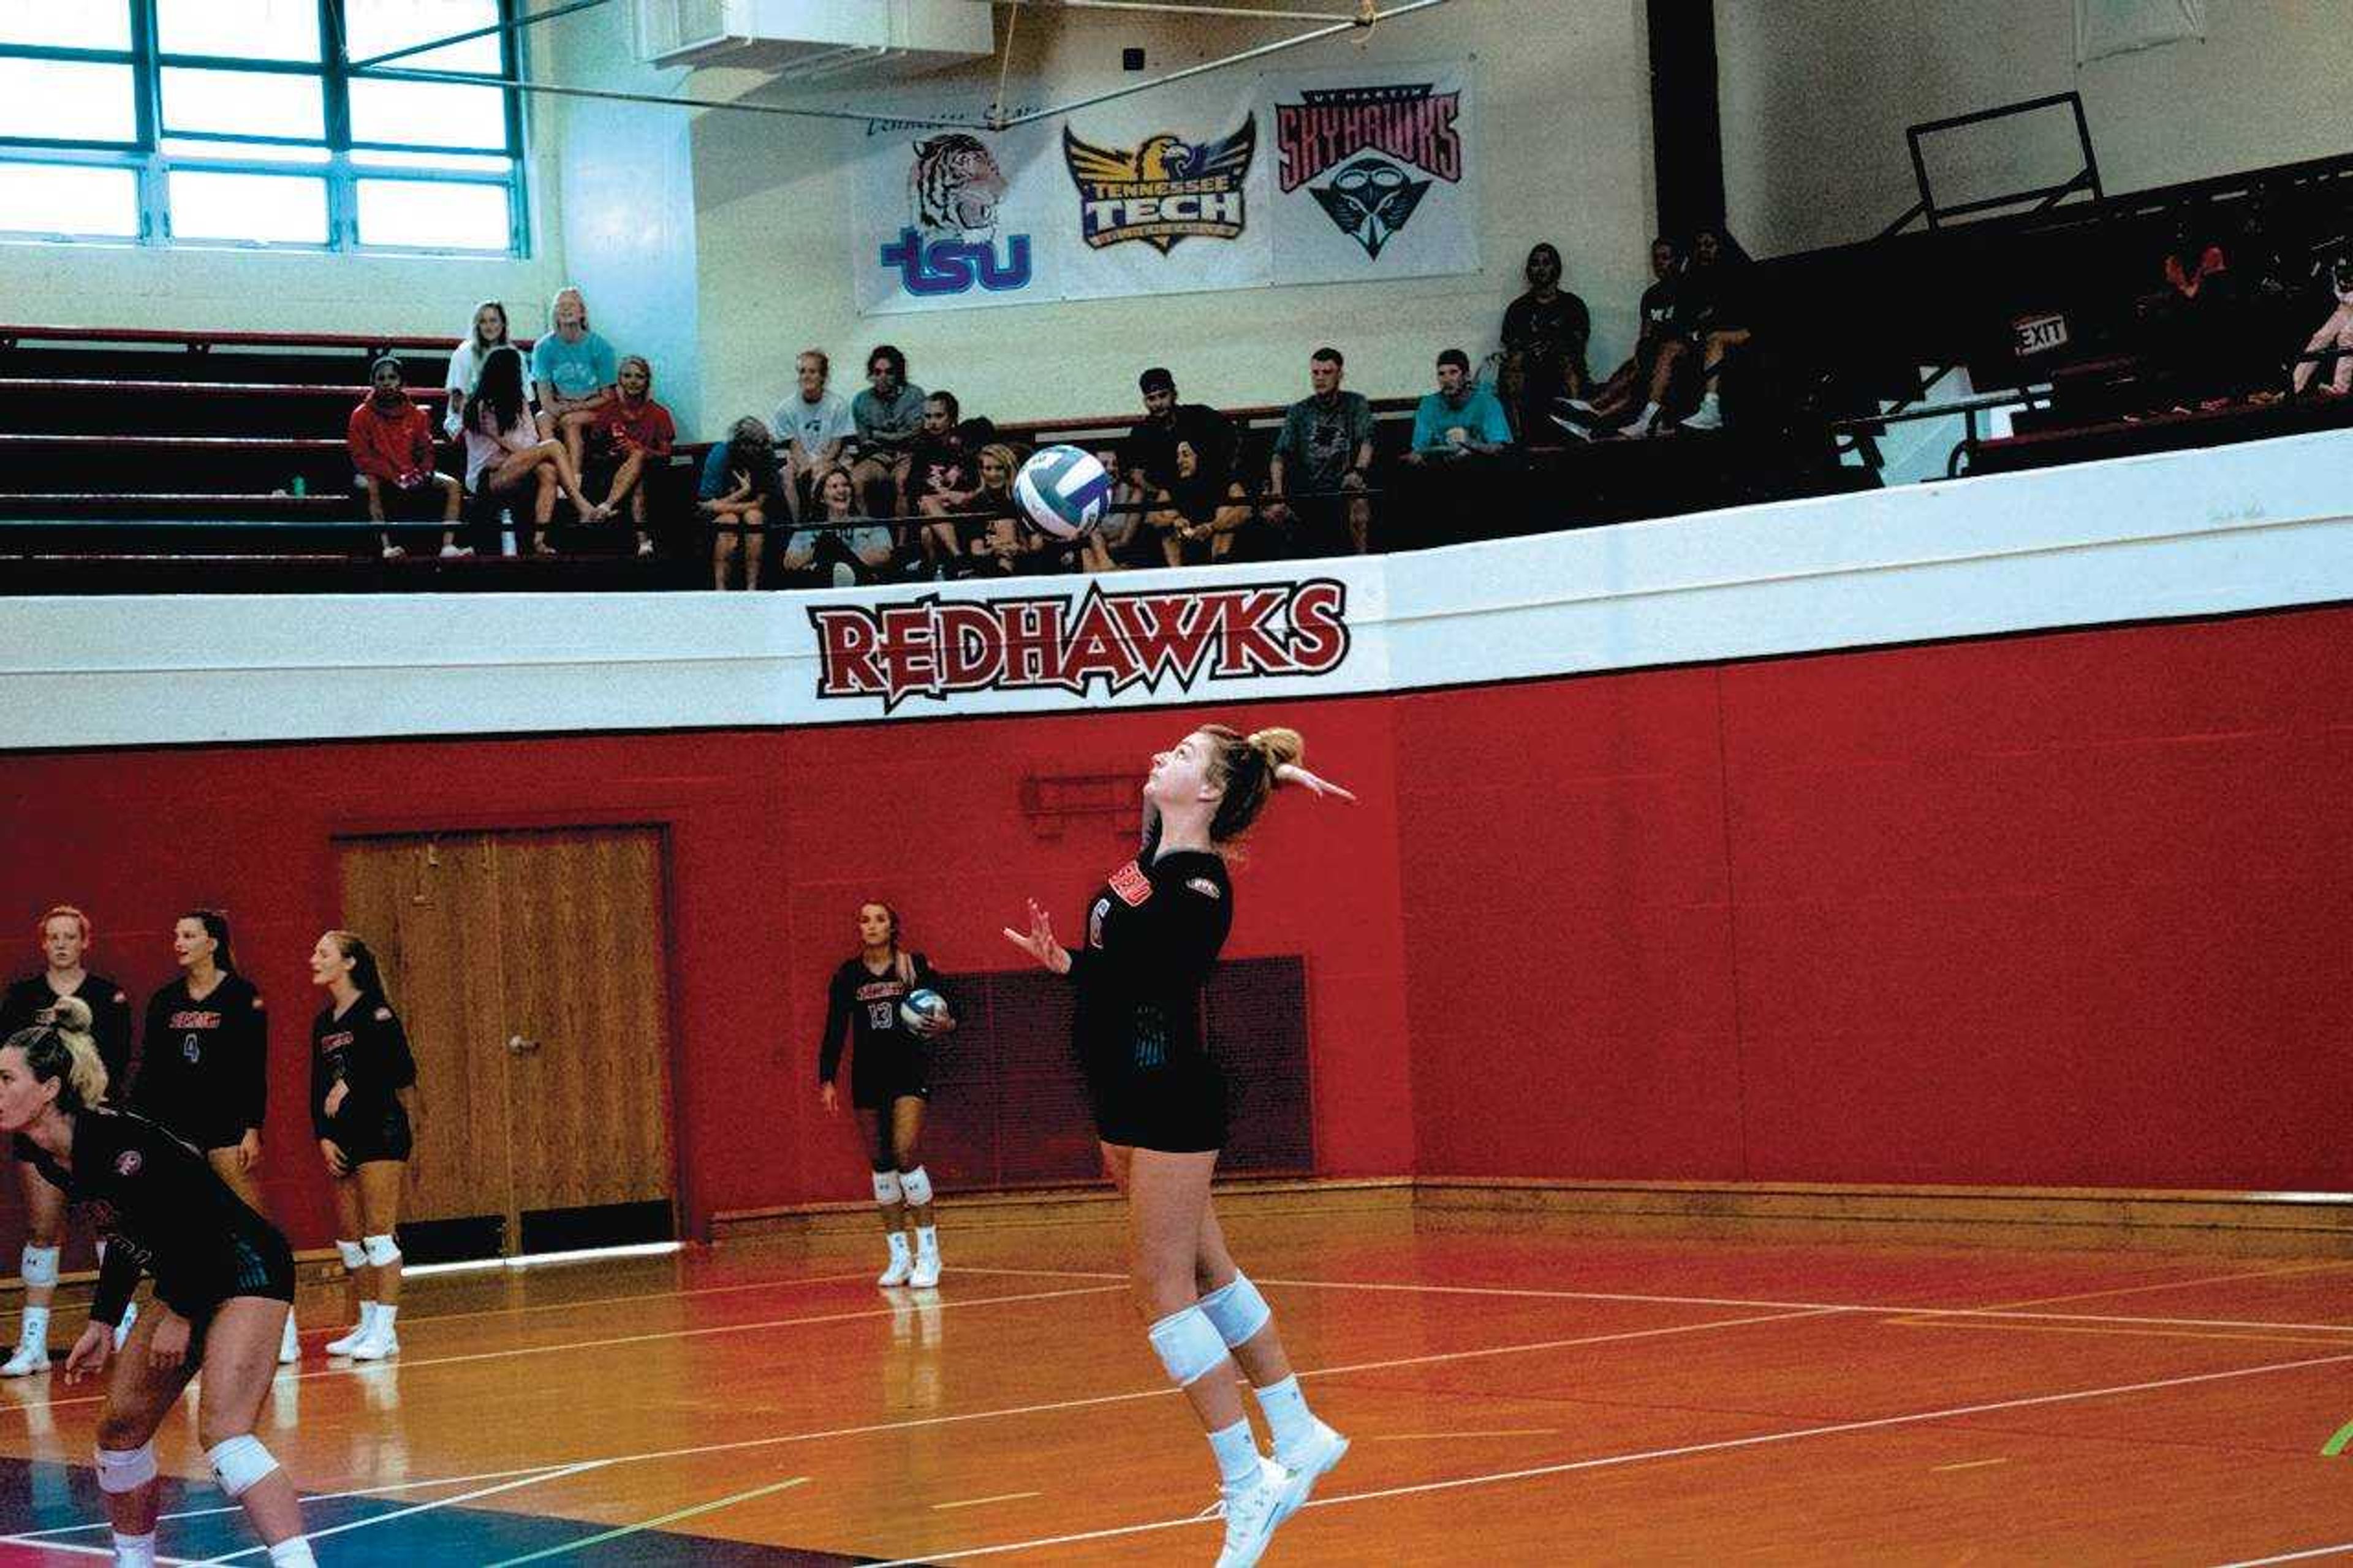 Junior defensive specialist Ally Dion serves in an exhibition match against Missouri Baptist University on Monday, Aug. 12 at Hock Field House. The Redhawks claimed victory in a three-set sweep.